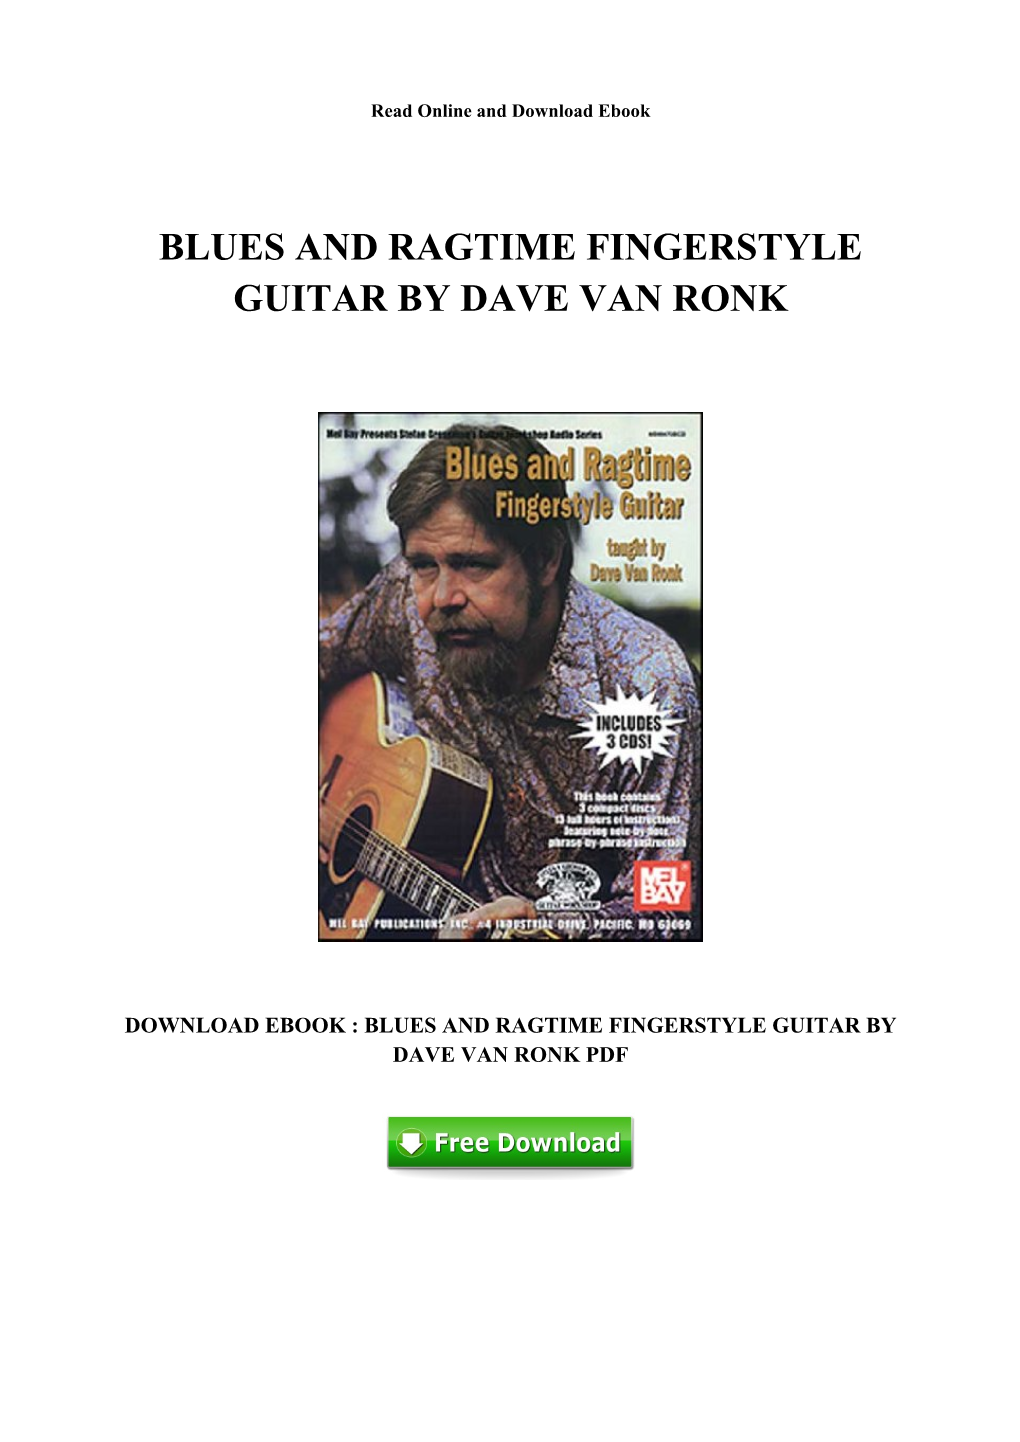 Ebook Download Blues and Ragtime Fingerstyle Guitar by Dave Van Ronk